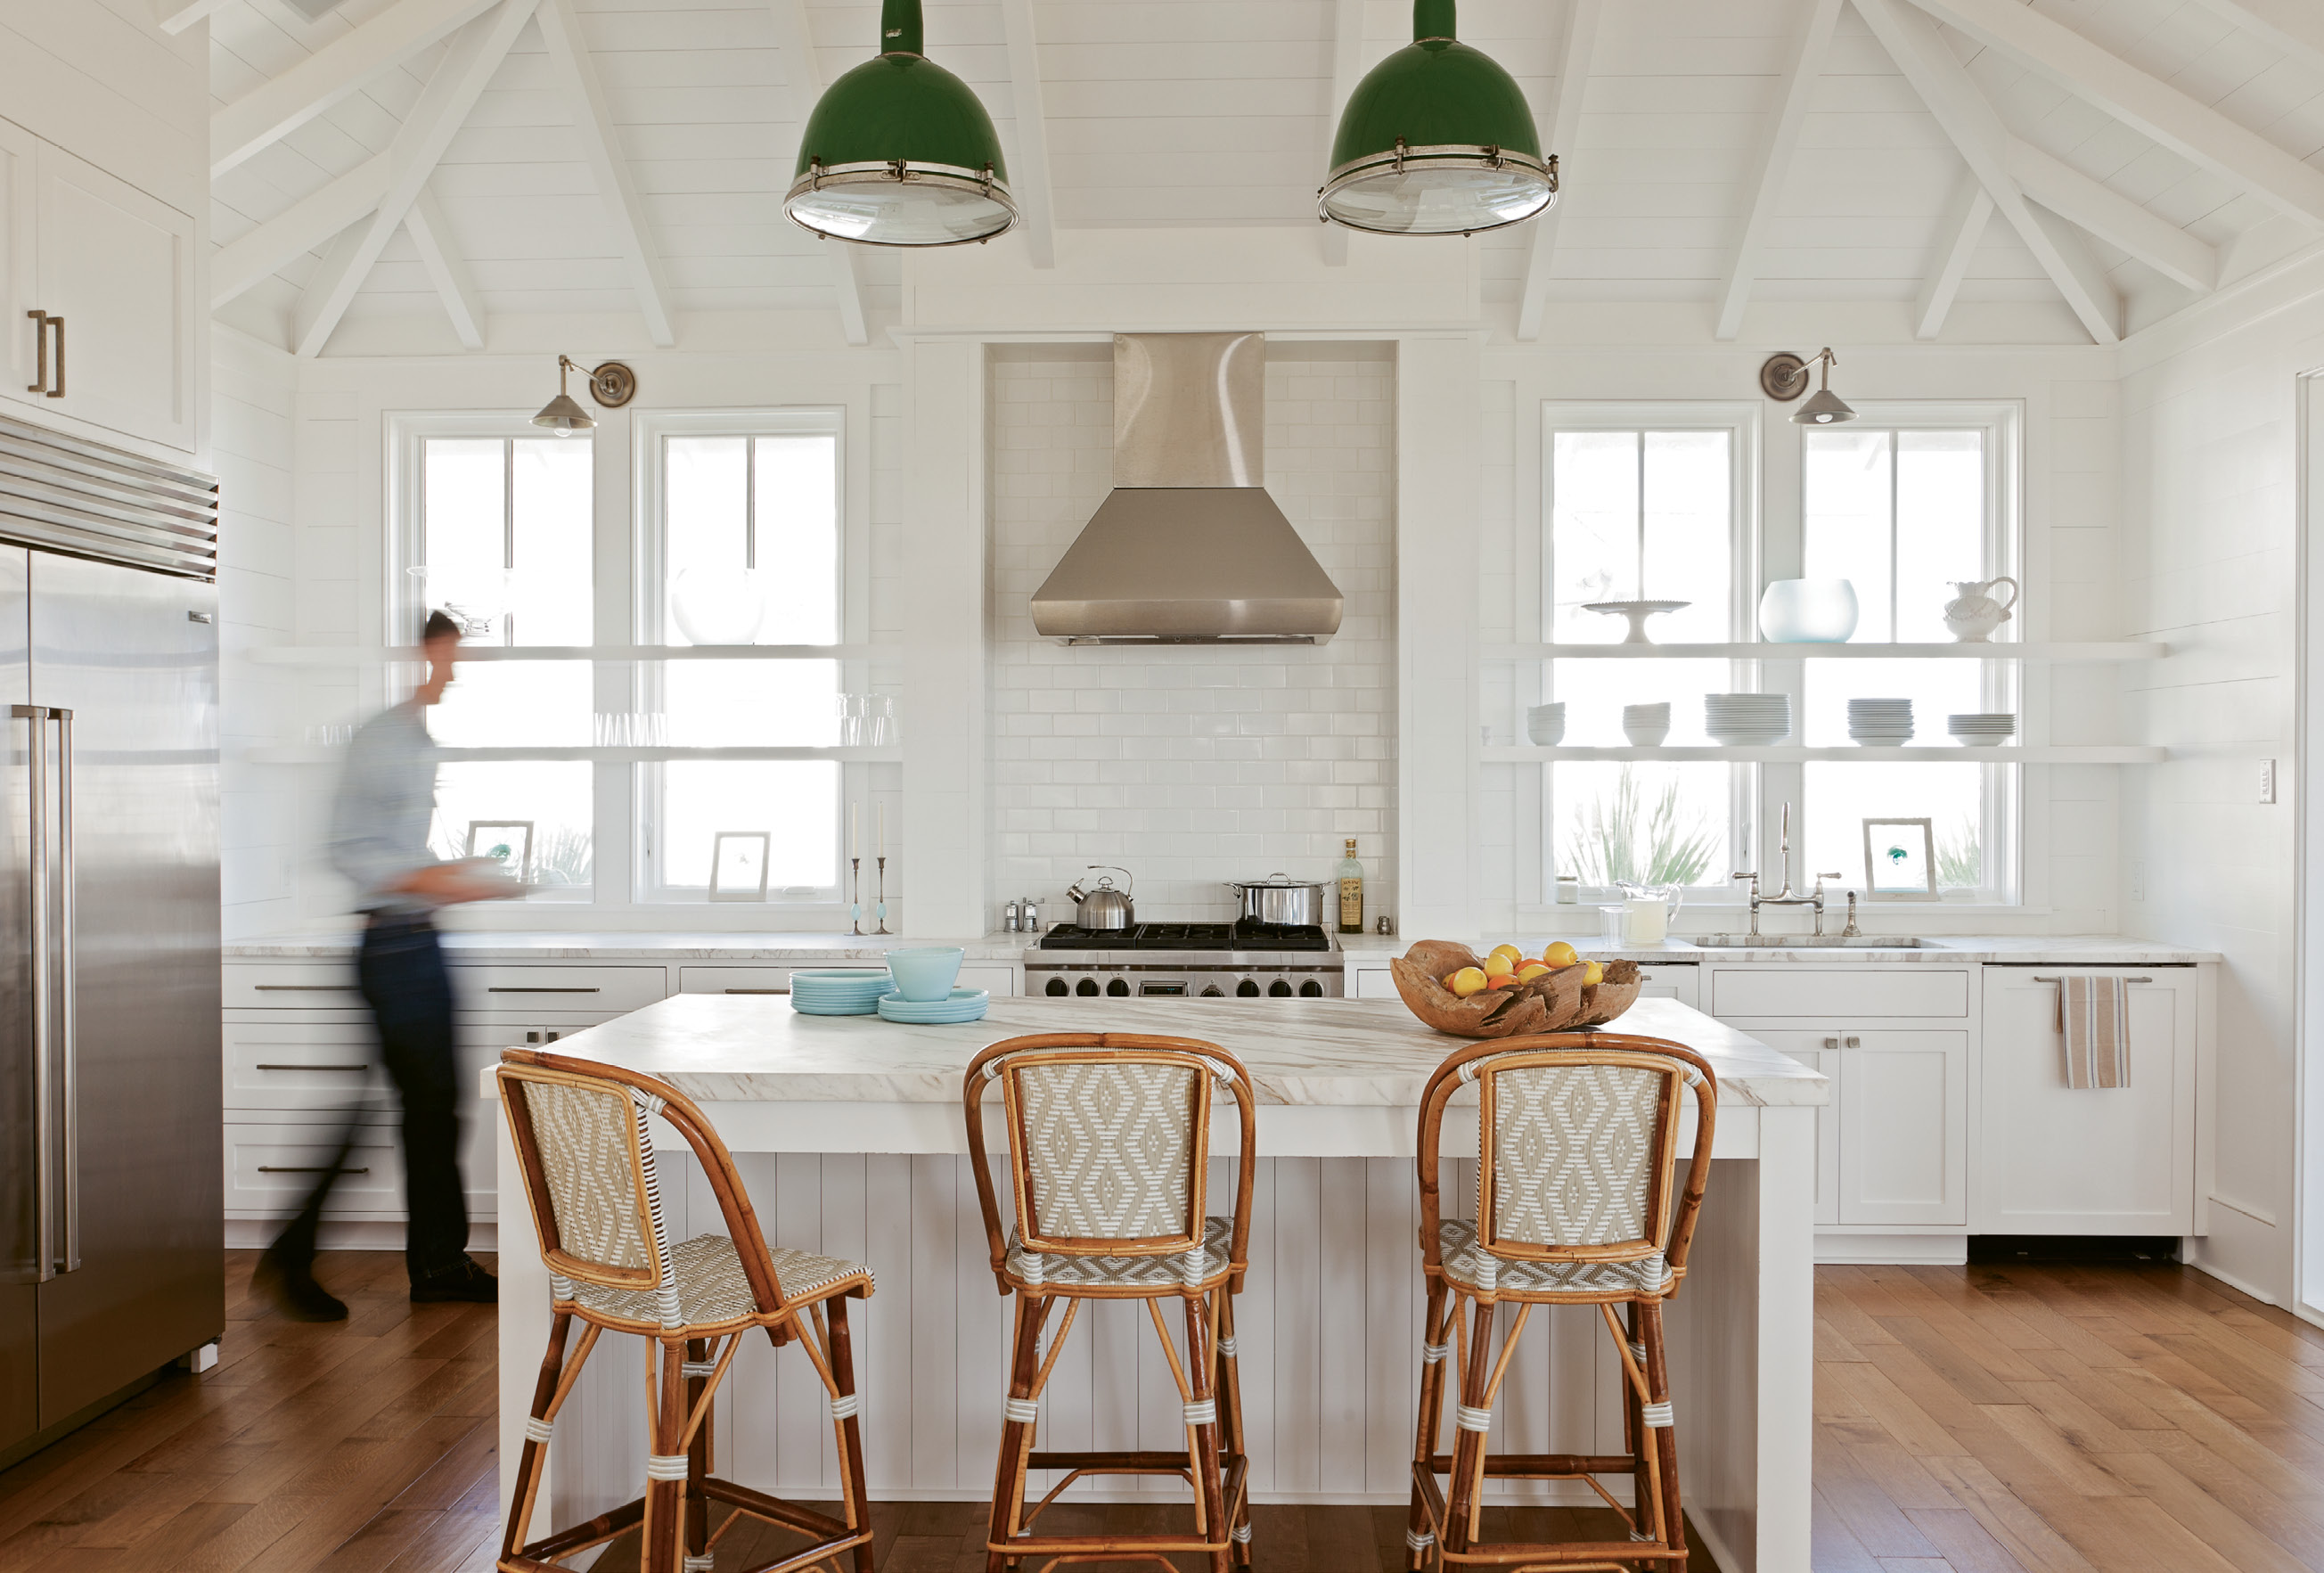 Bright Ideas: Keenan refashioned two old gymnasium lights, hung by a whipped rope cord, as kitchen pendants, adding a pop of color to the mostly white space.